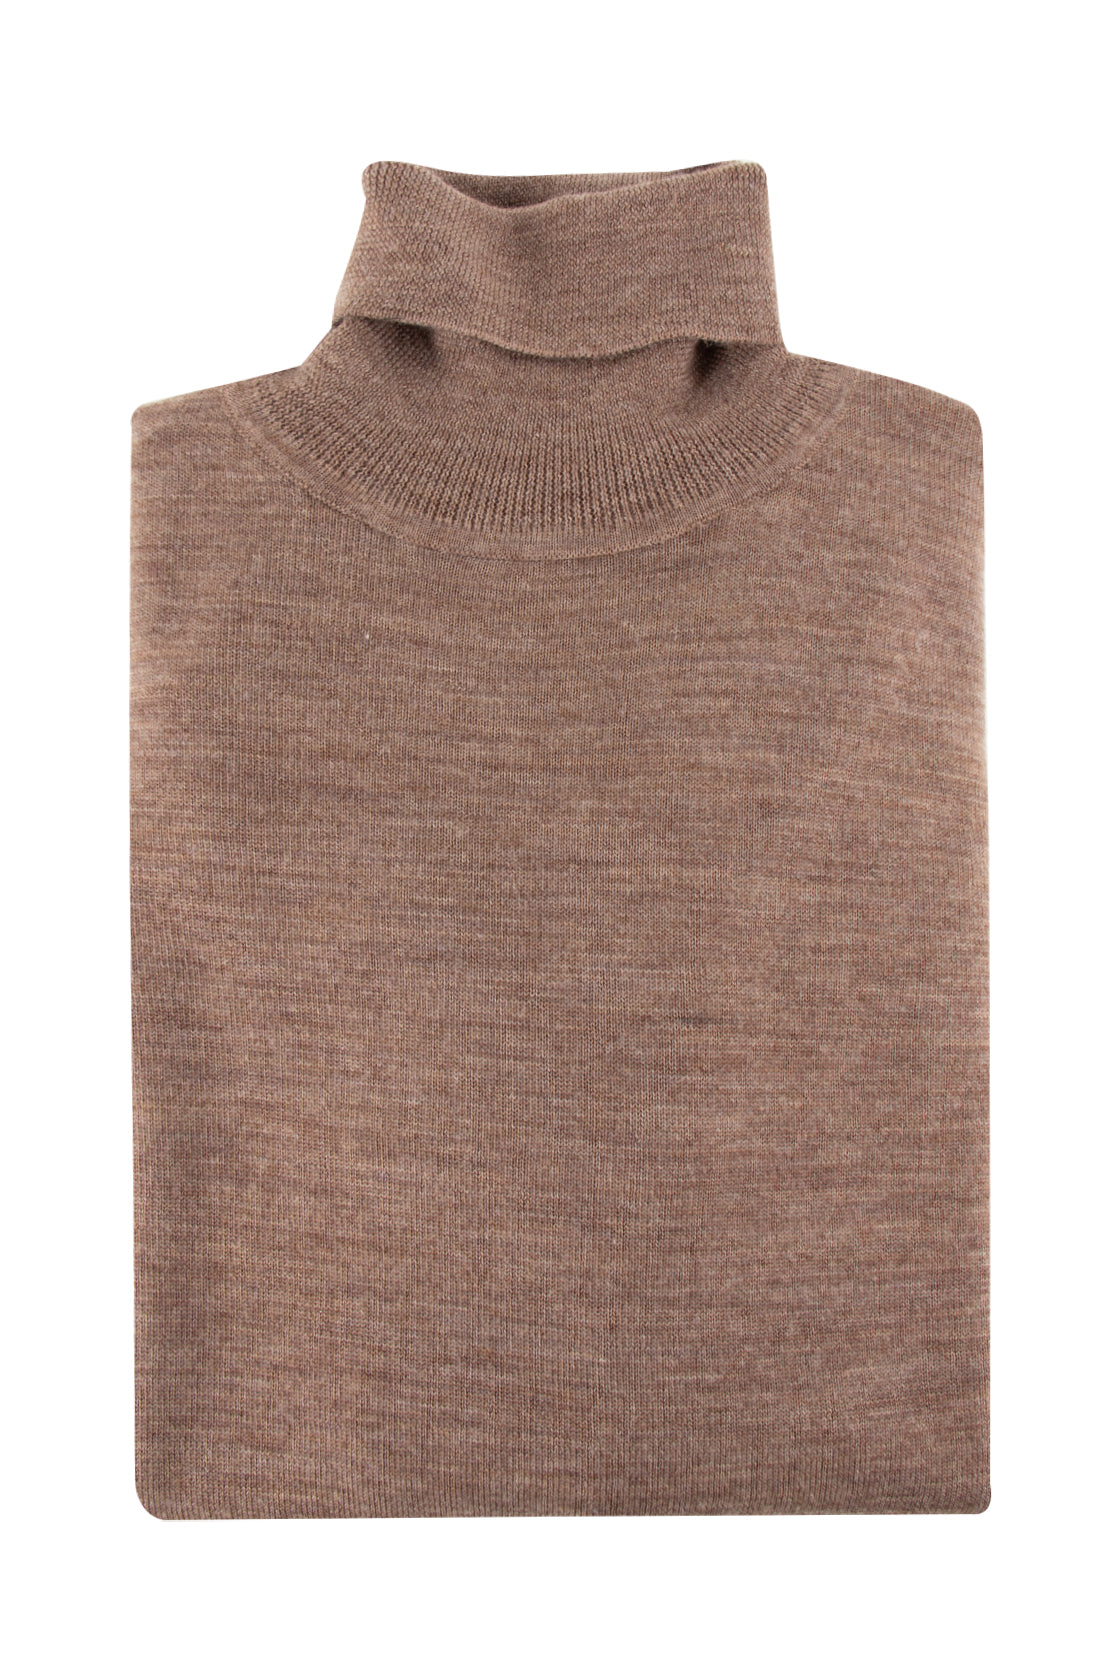 Rembrandt Wanaka Roll Neck Jersey Brown